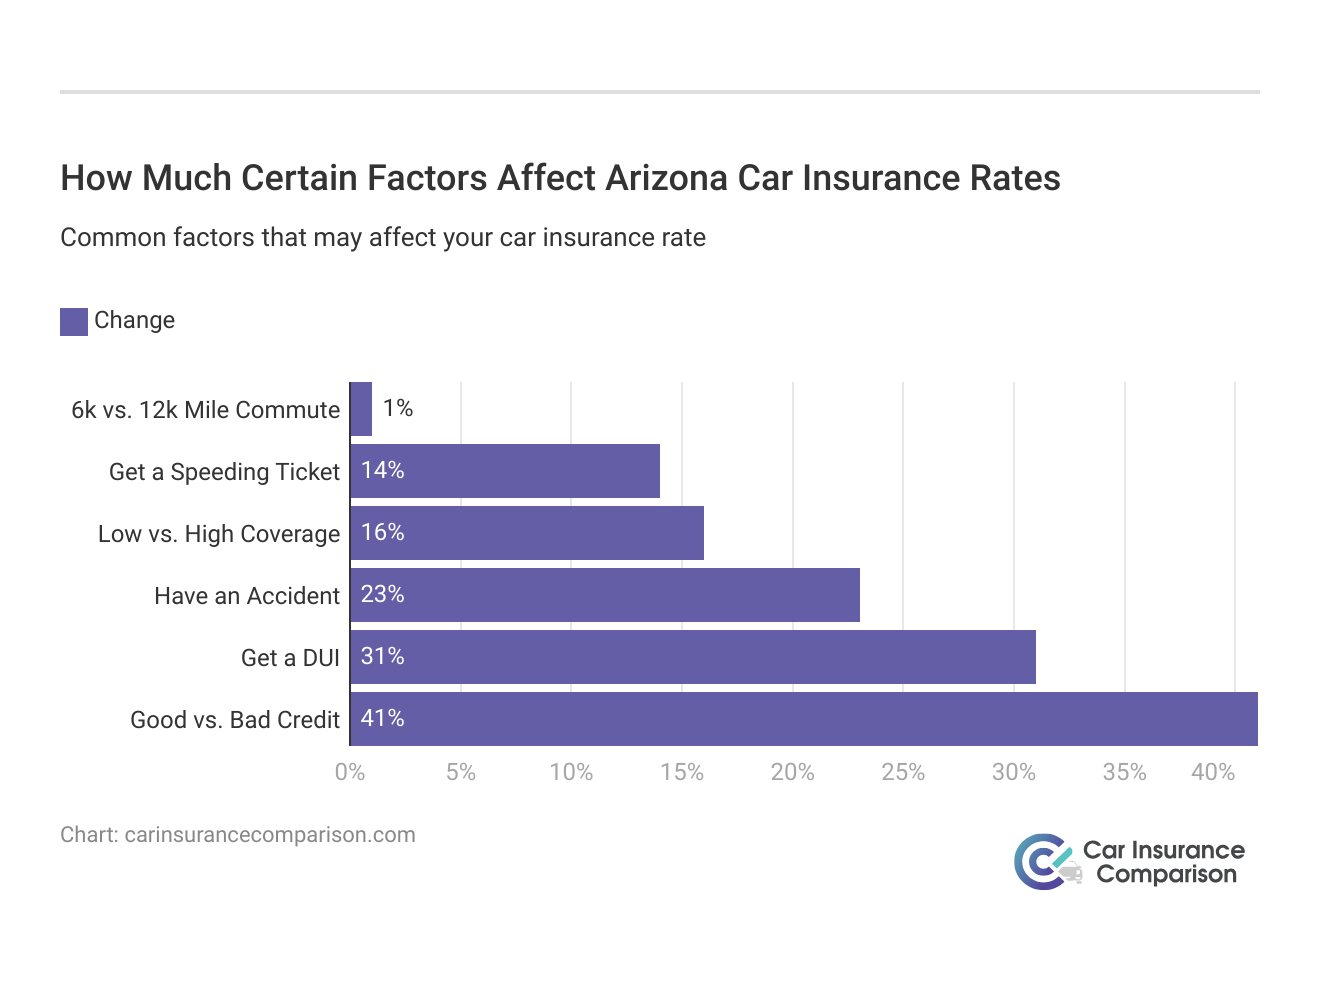 <h3>How Much Certain Factors Affect Arizona Car Insurance Rates</h3>